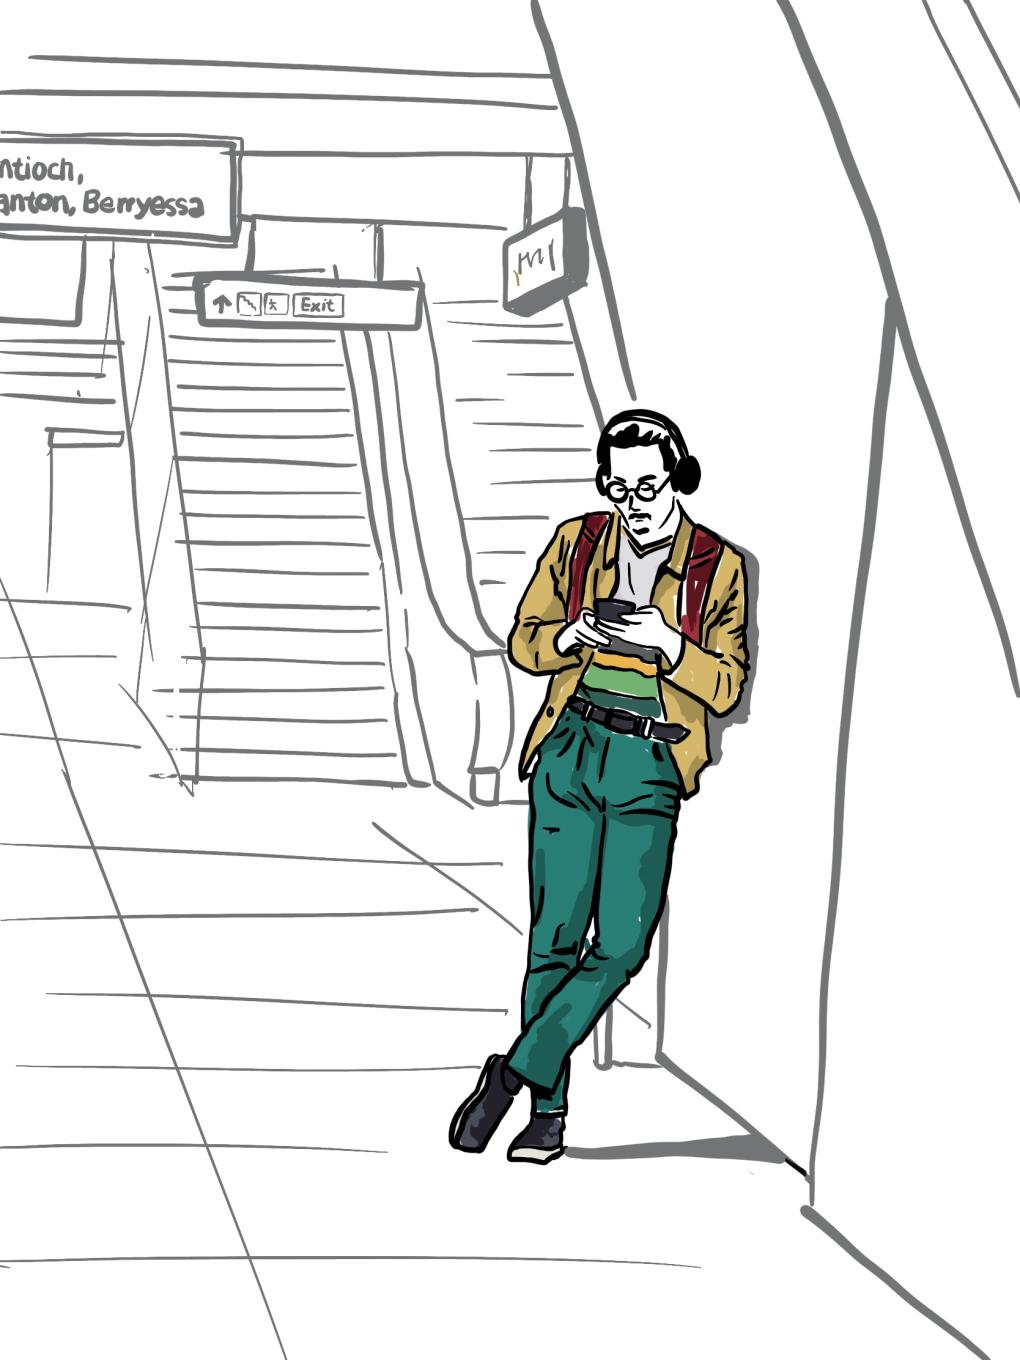 A man in yellow and green standing in a white and black line drawing of a BART station